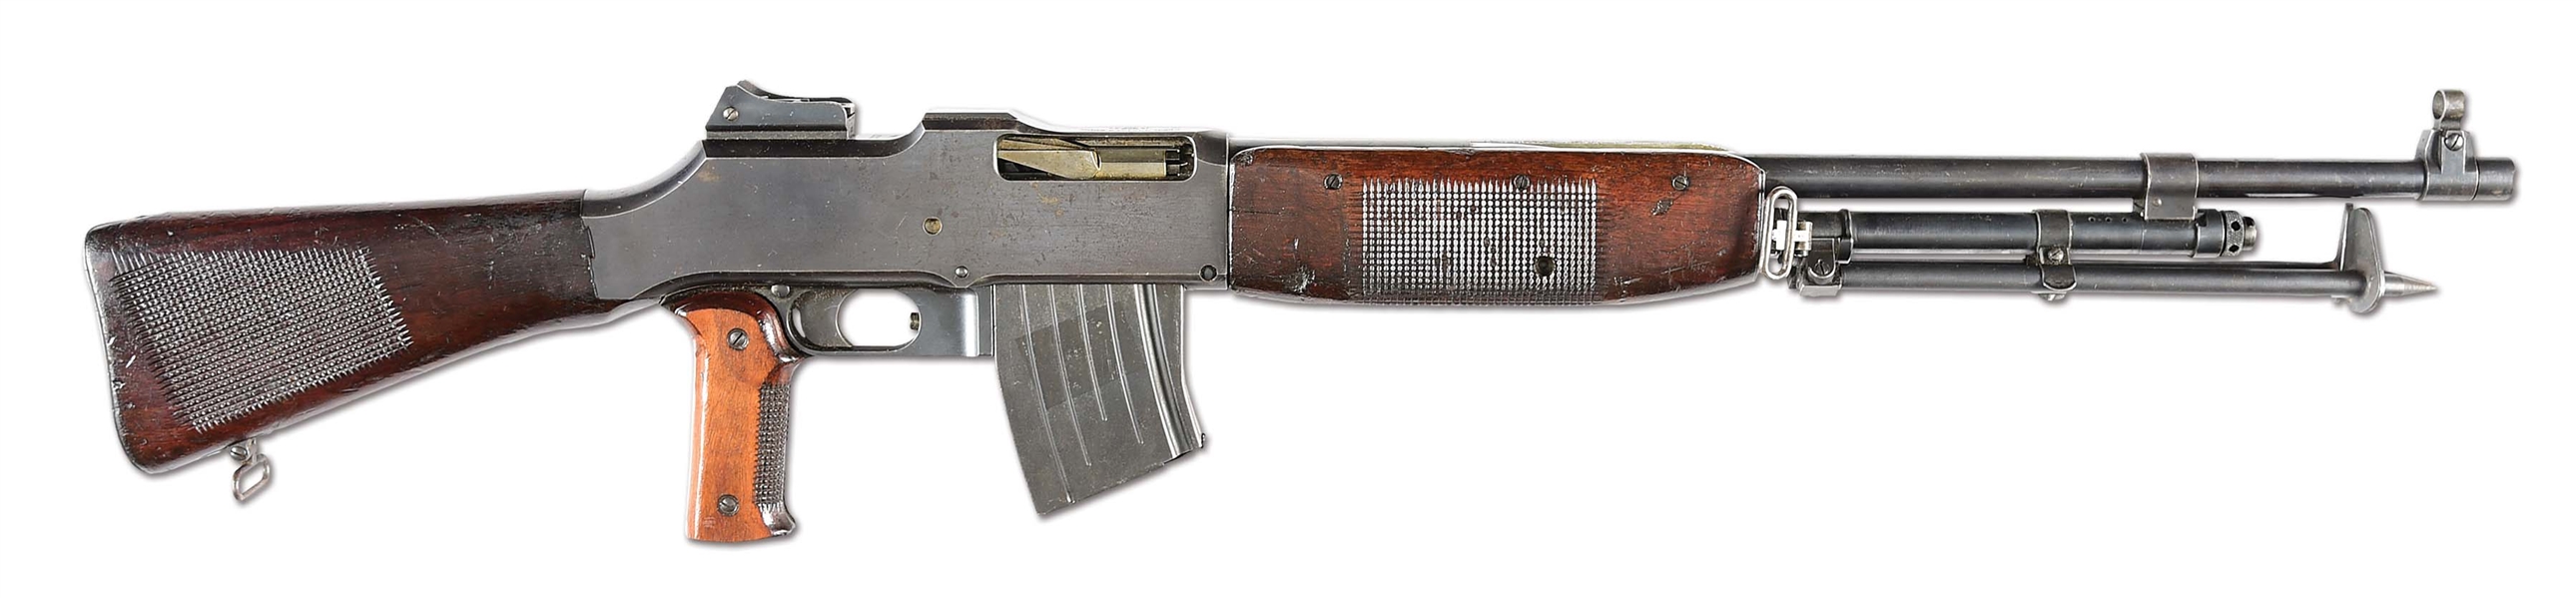 (N) BEAUTIFUL AND SCARCE CARL GUSTAV MODEL 1929 BROWNING AUTOMATIC RIFLE (B.A.R.) (CURIO AND RELIC).